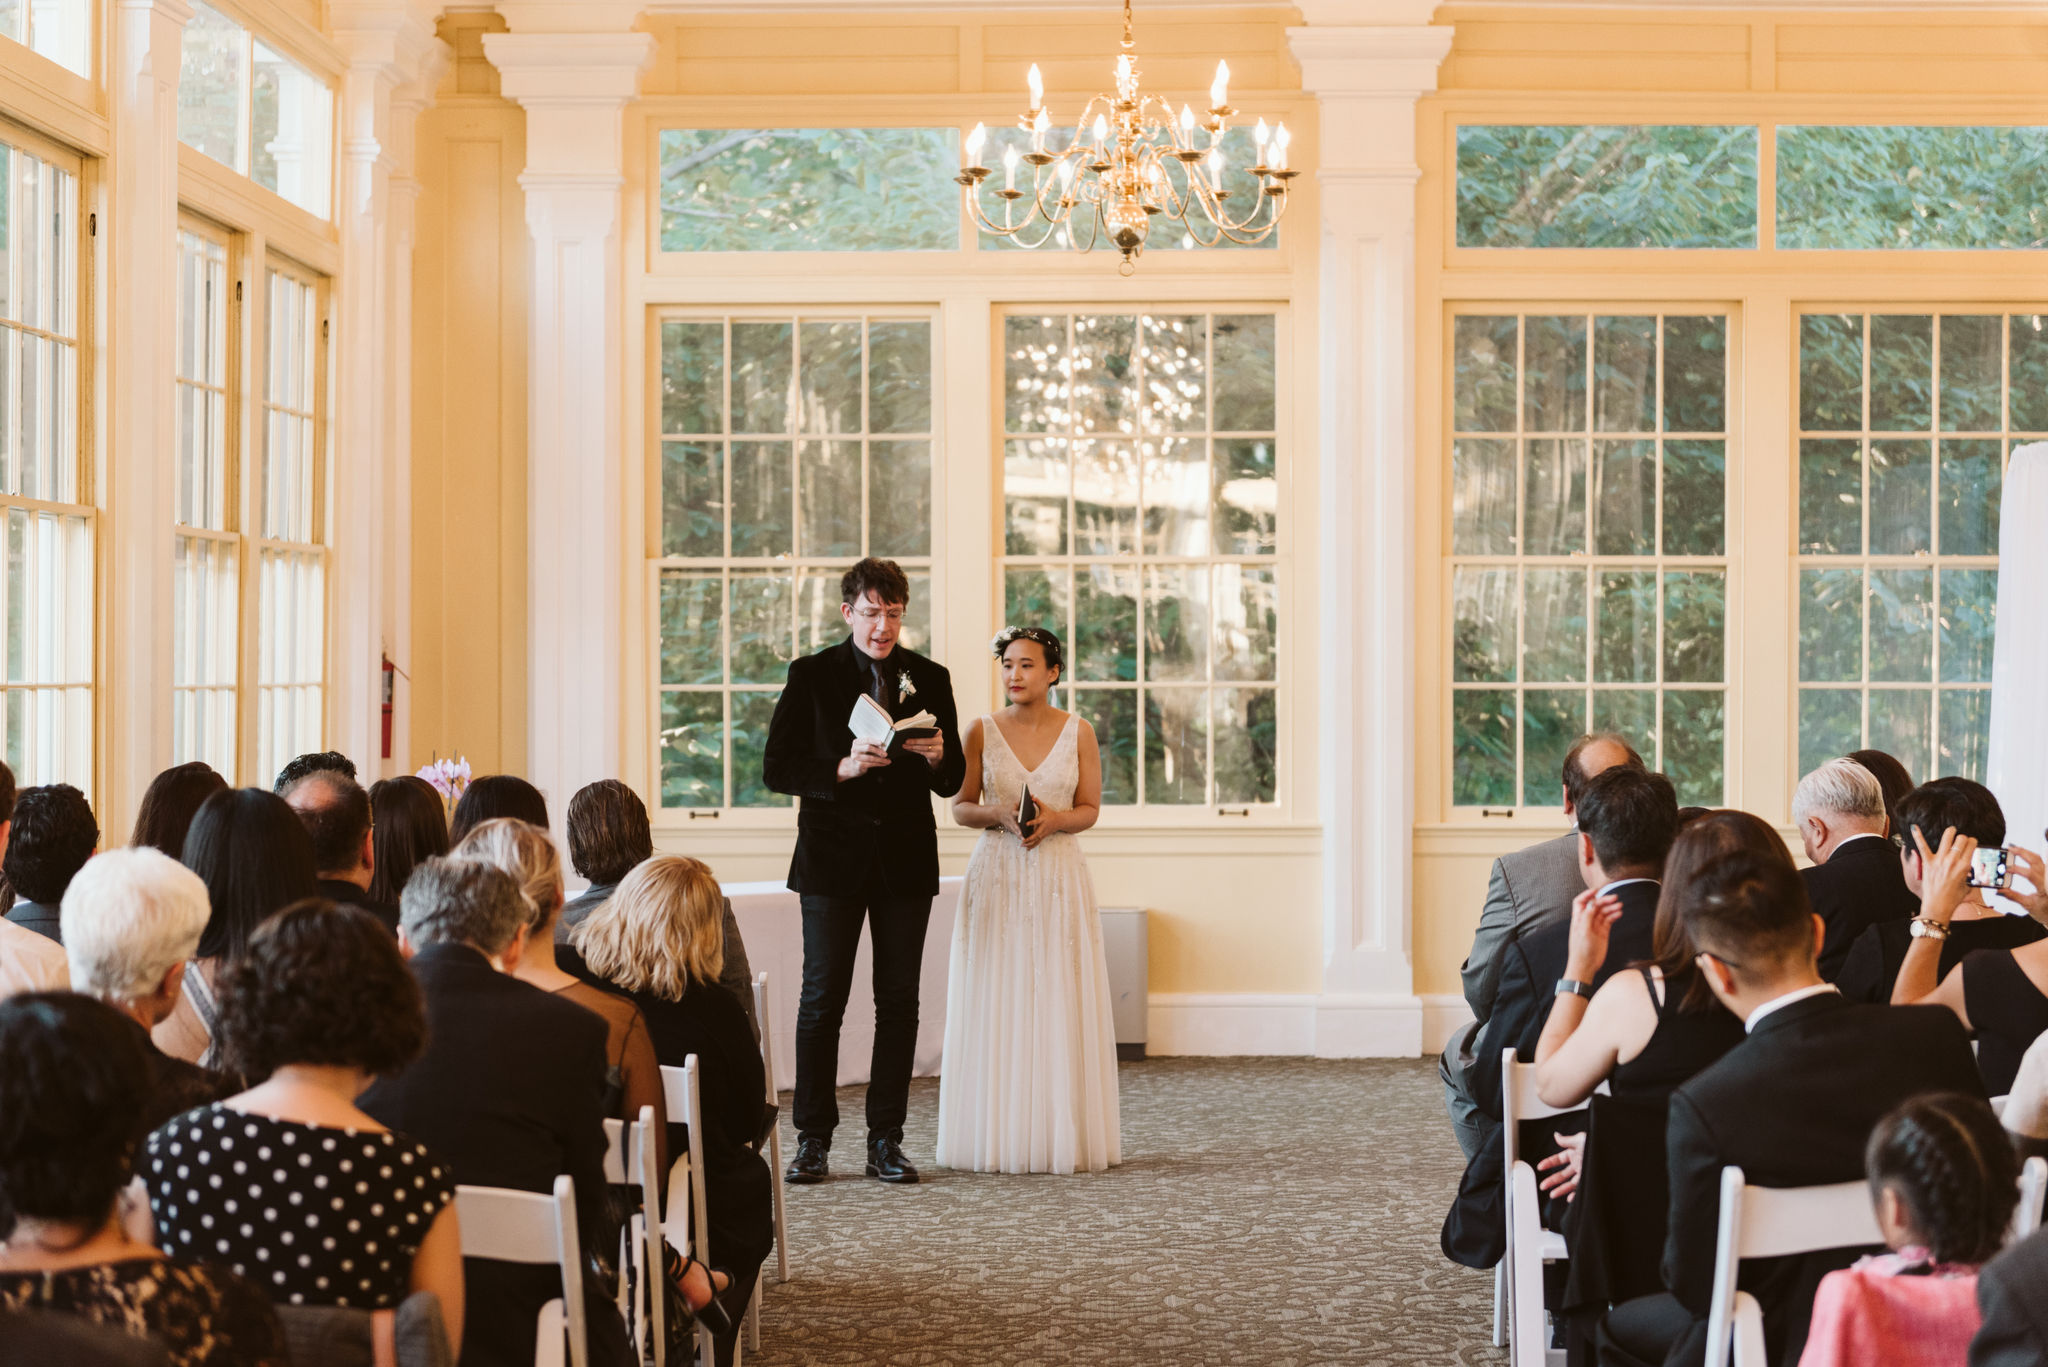  Baltimore, Maryland Wedding Photographer, The Mansion House at the Maryland Zoo, Relaxed, Romantic, Laid Back, Bride and Groom Exchanging Vows in Front of Guests in Manor House 